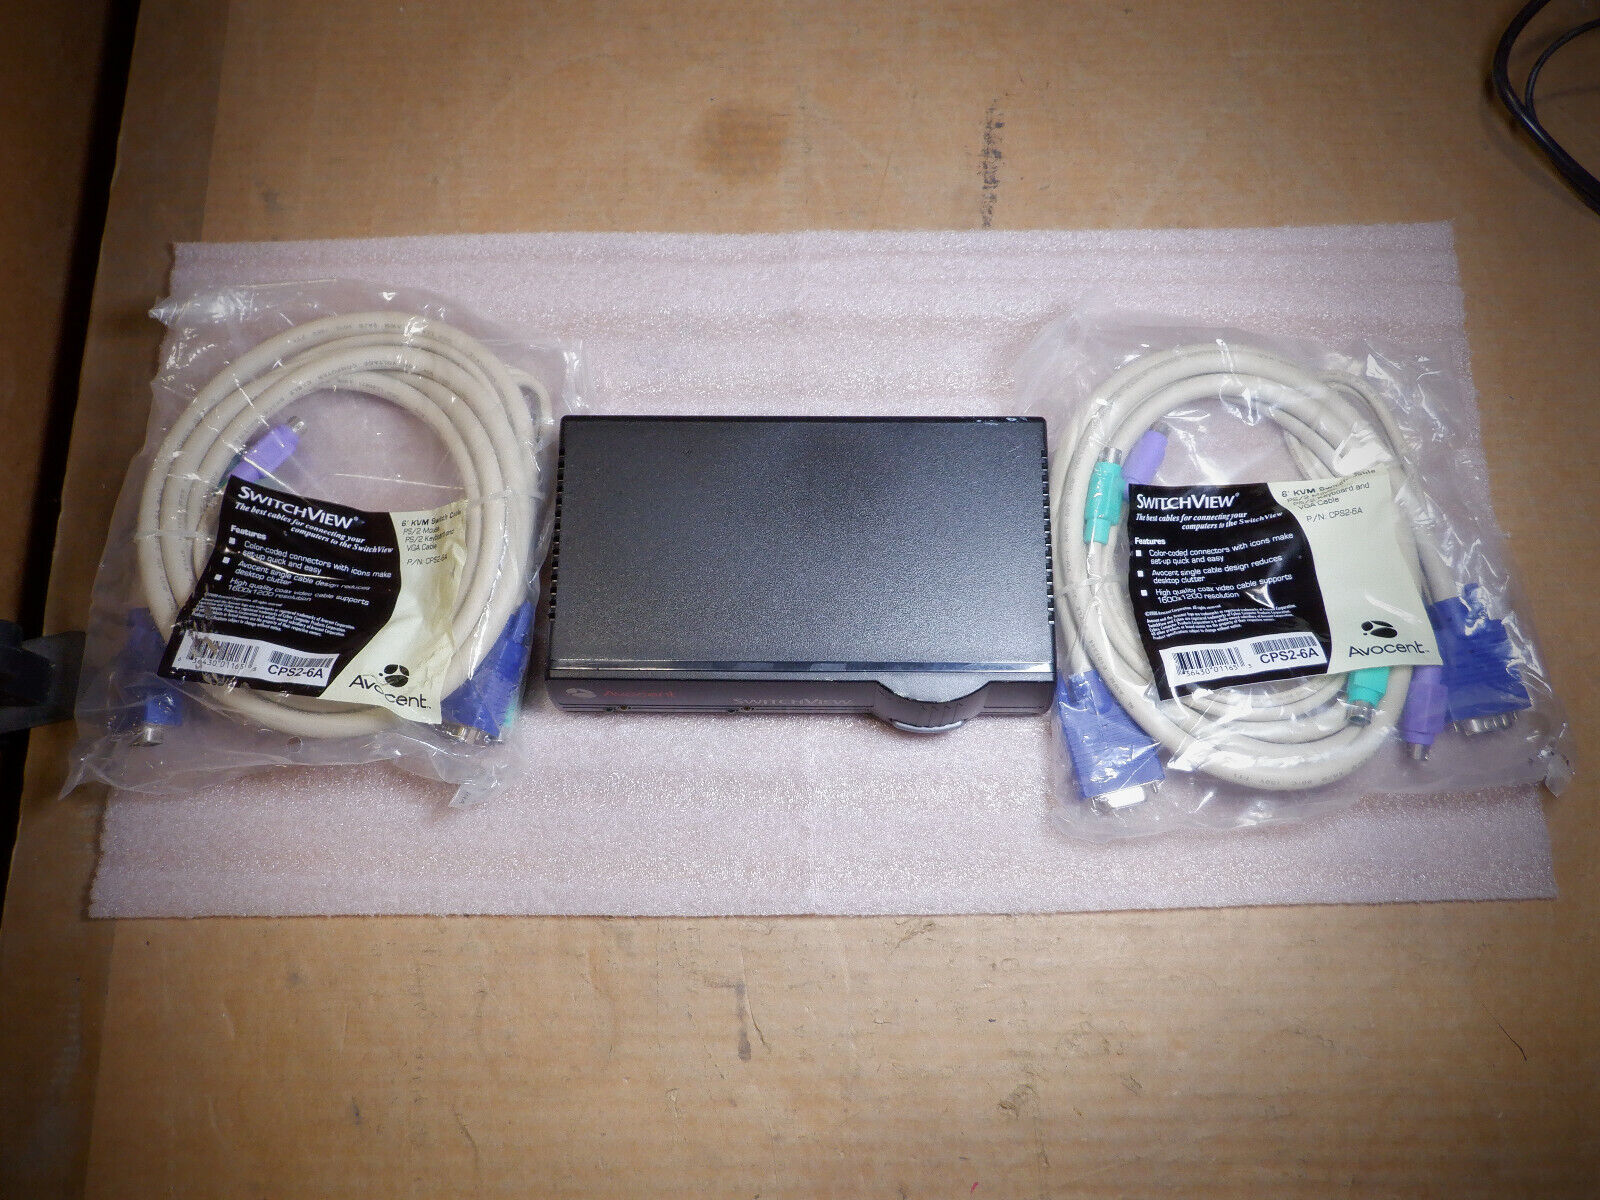 AVOCENT 520-194-006 SWITCHVIEW- 2 PORT W/ (2) 6' KVM SWITCH CABLES